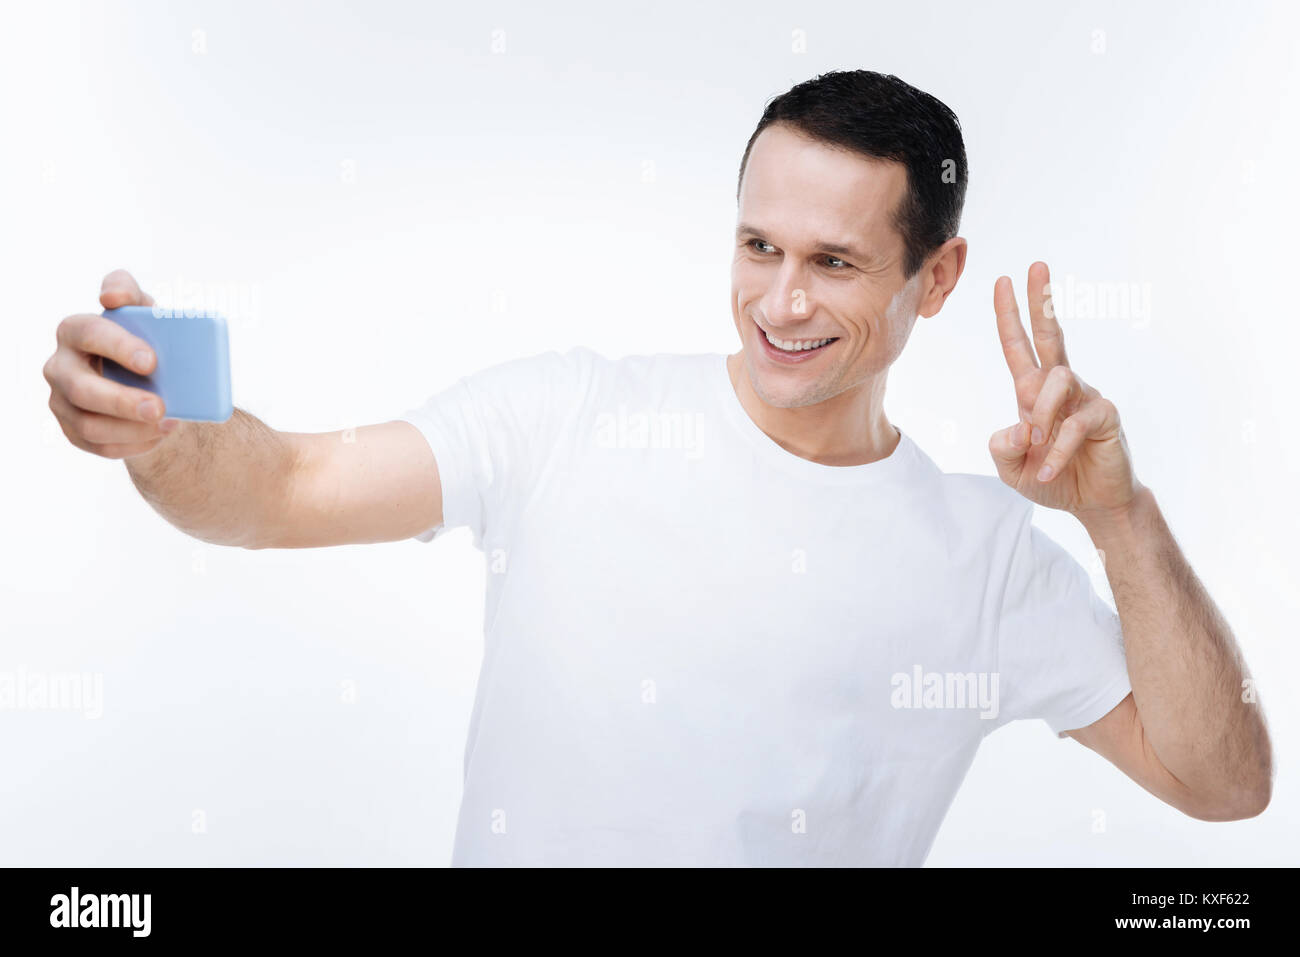 Nice positive man showing V sign Stock Photo